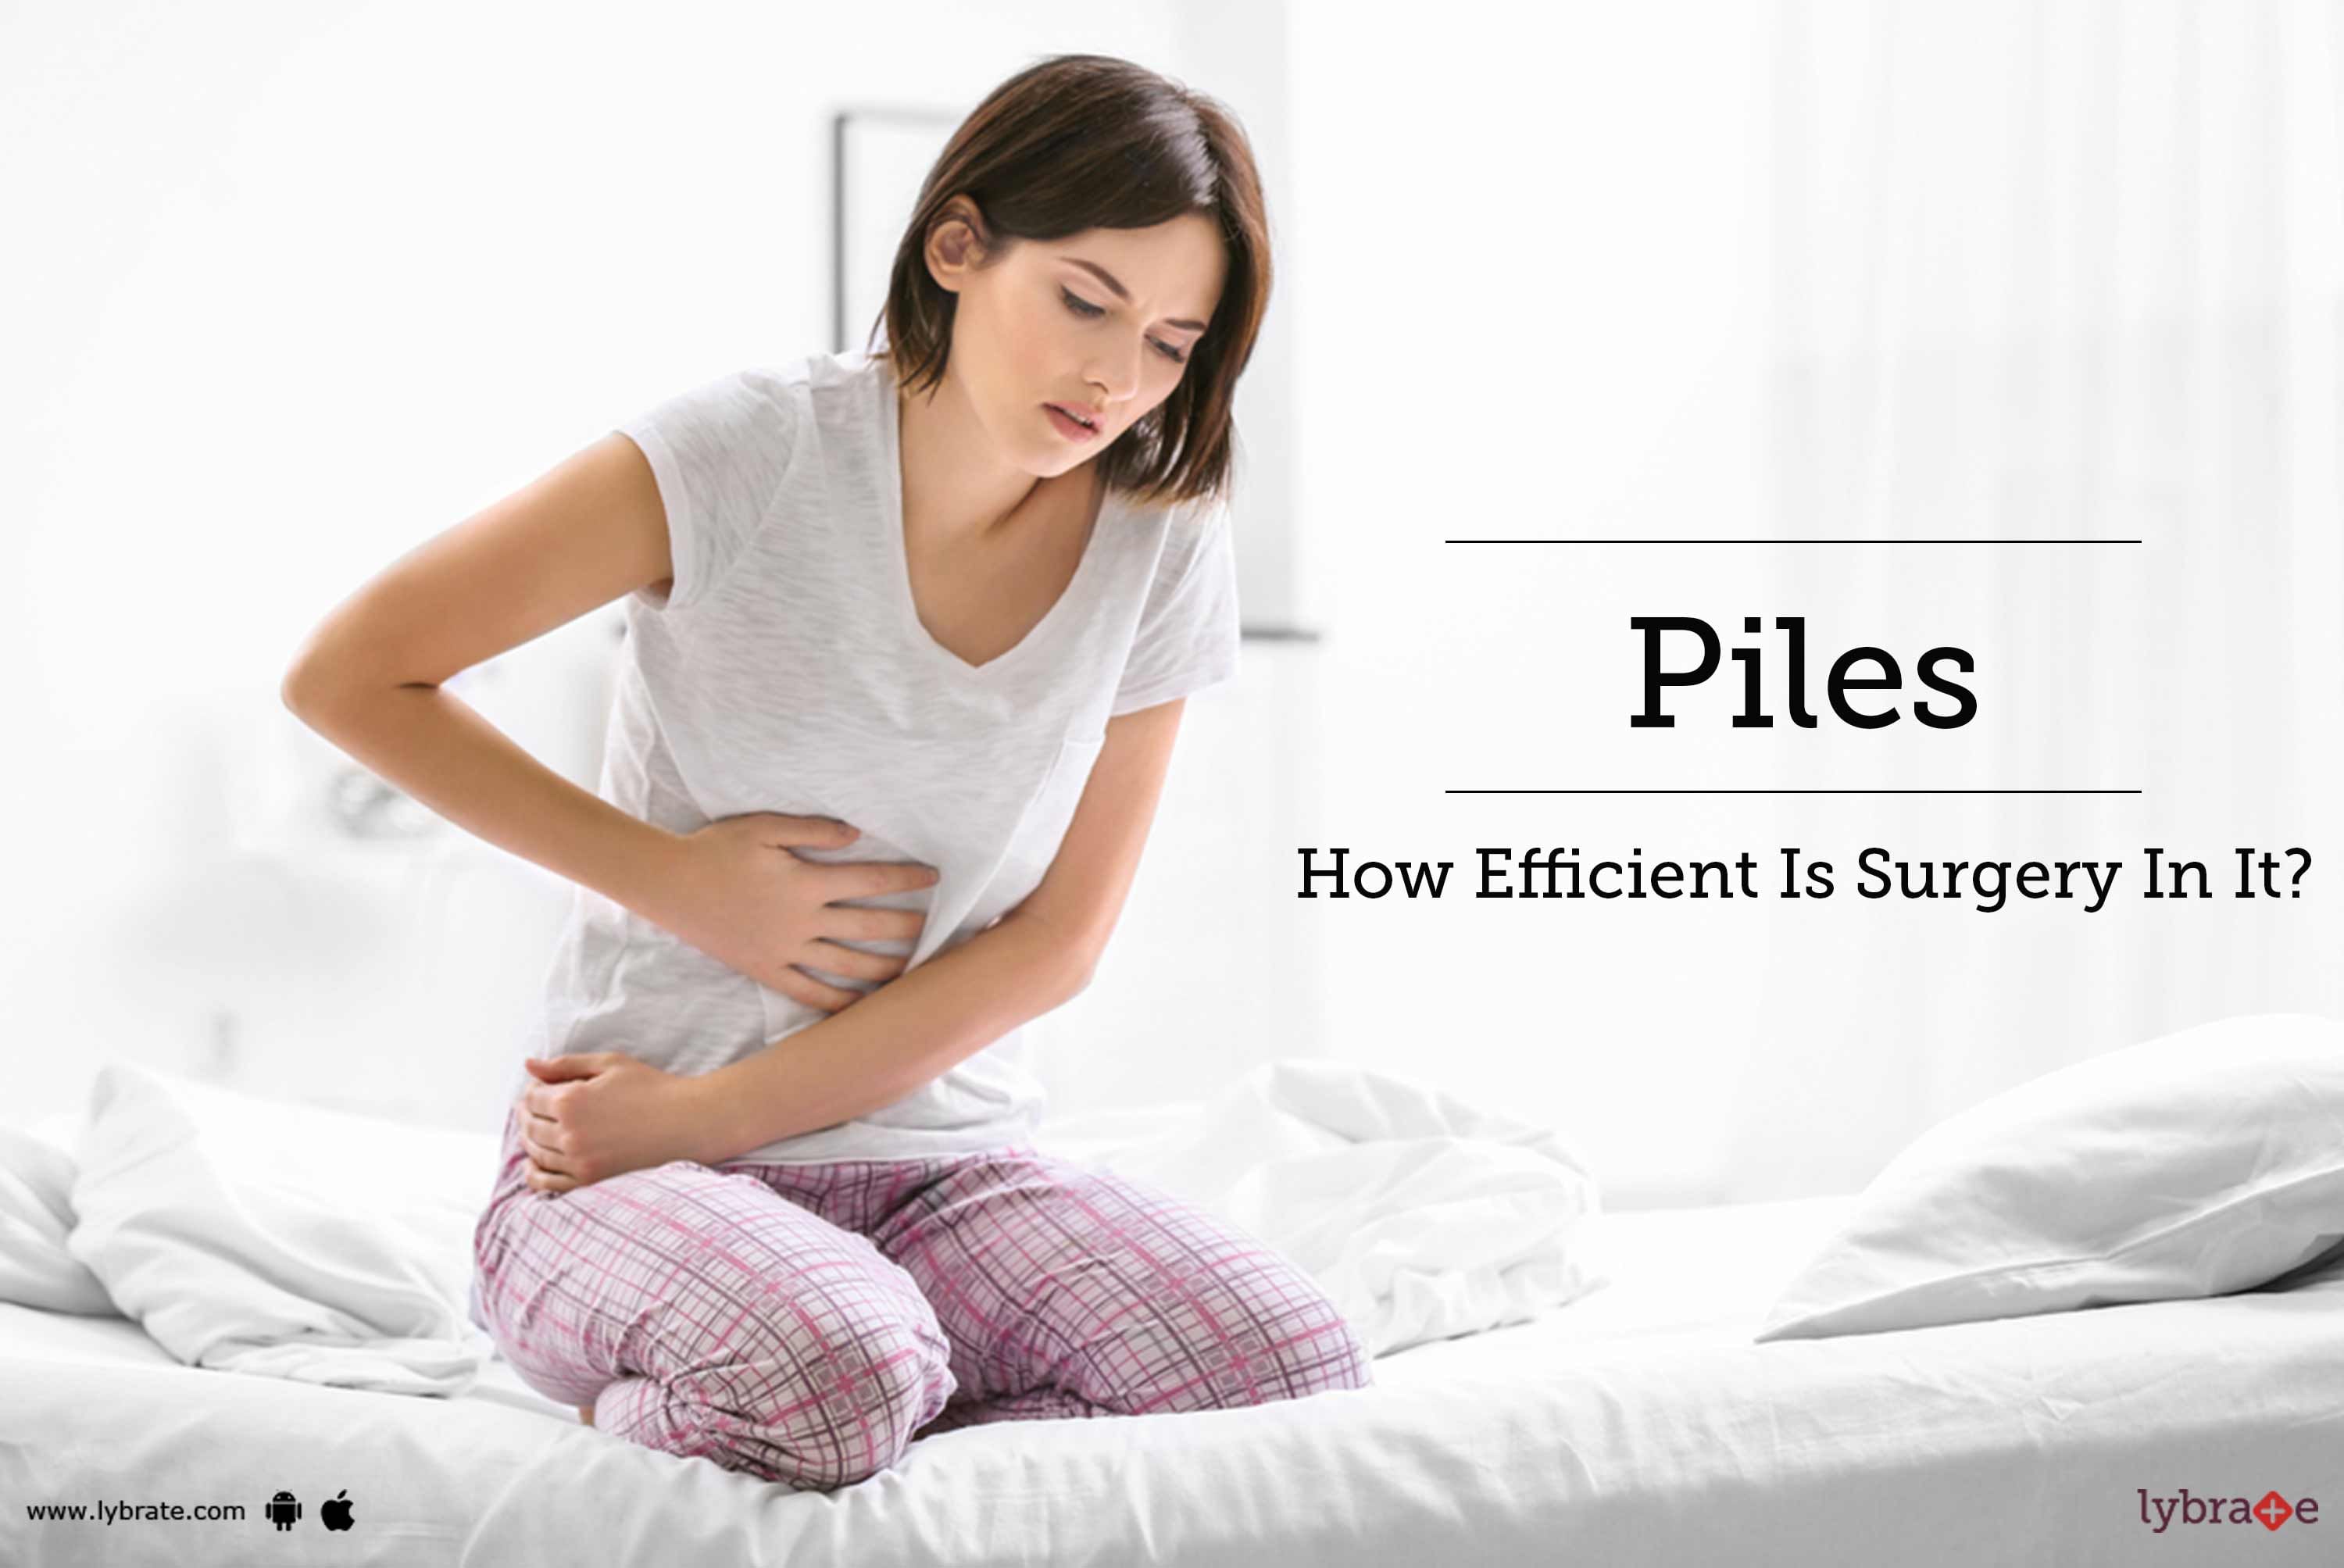 Piles - How Efficient Is Surgery In It?